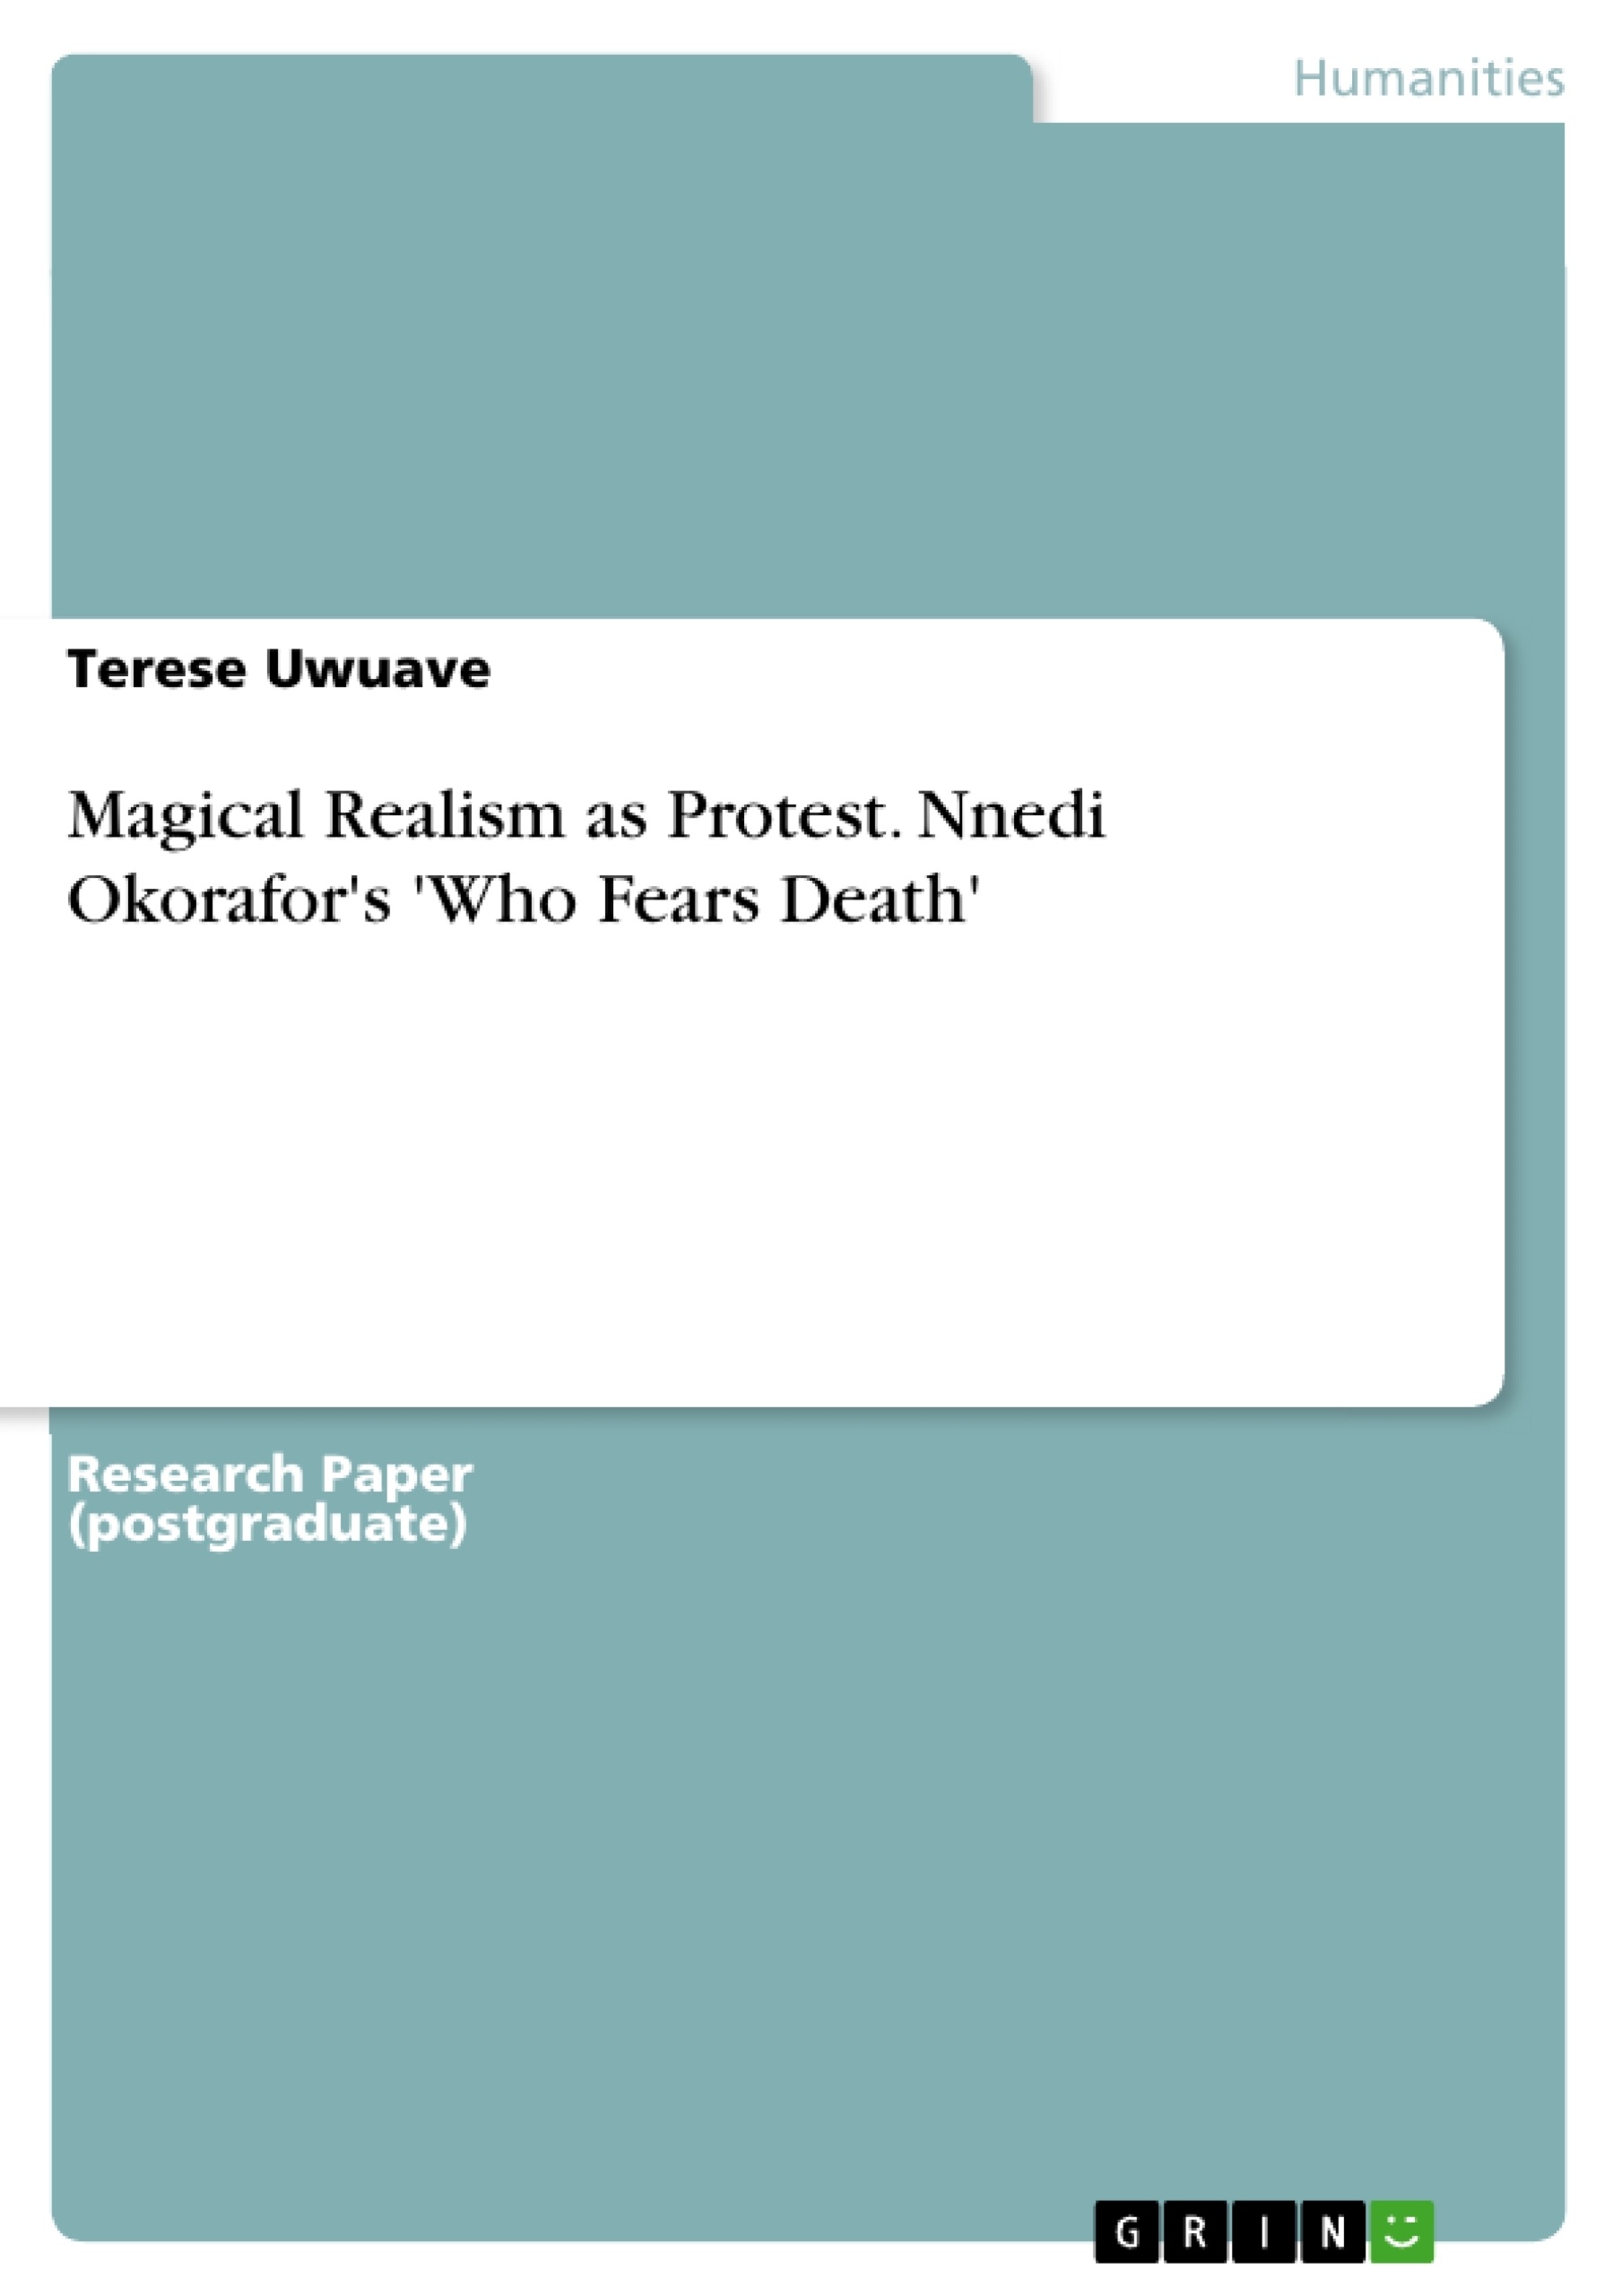 Title: Magical Realism as Protest. Nnedi Okorafor's 'Who Fears Death'